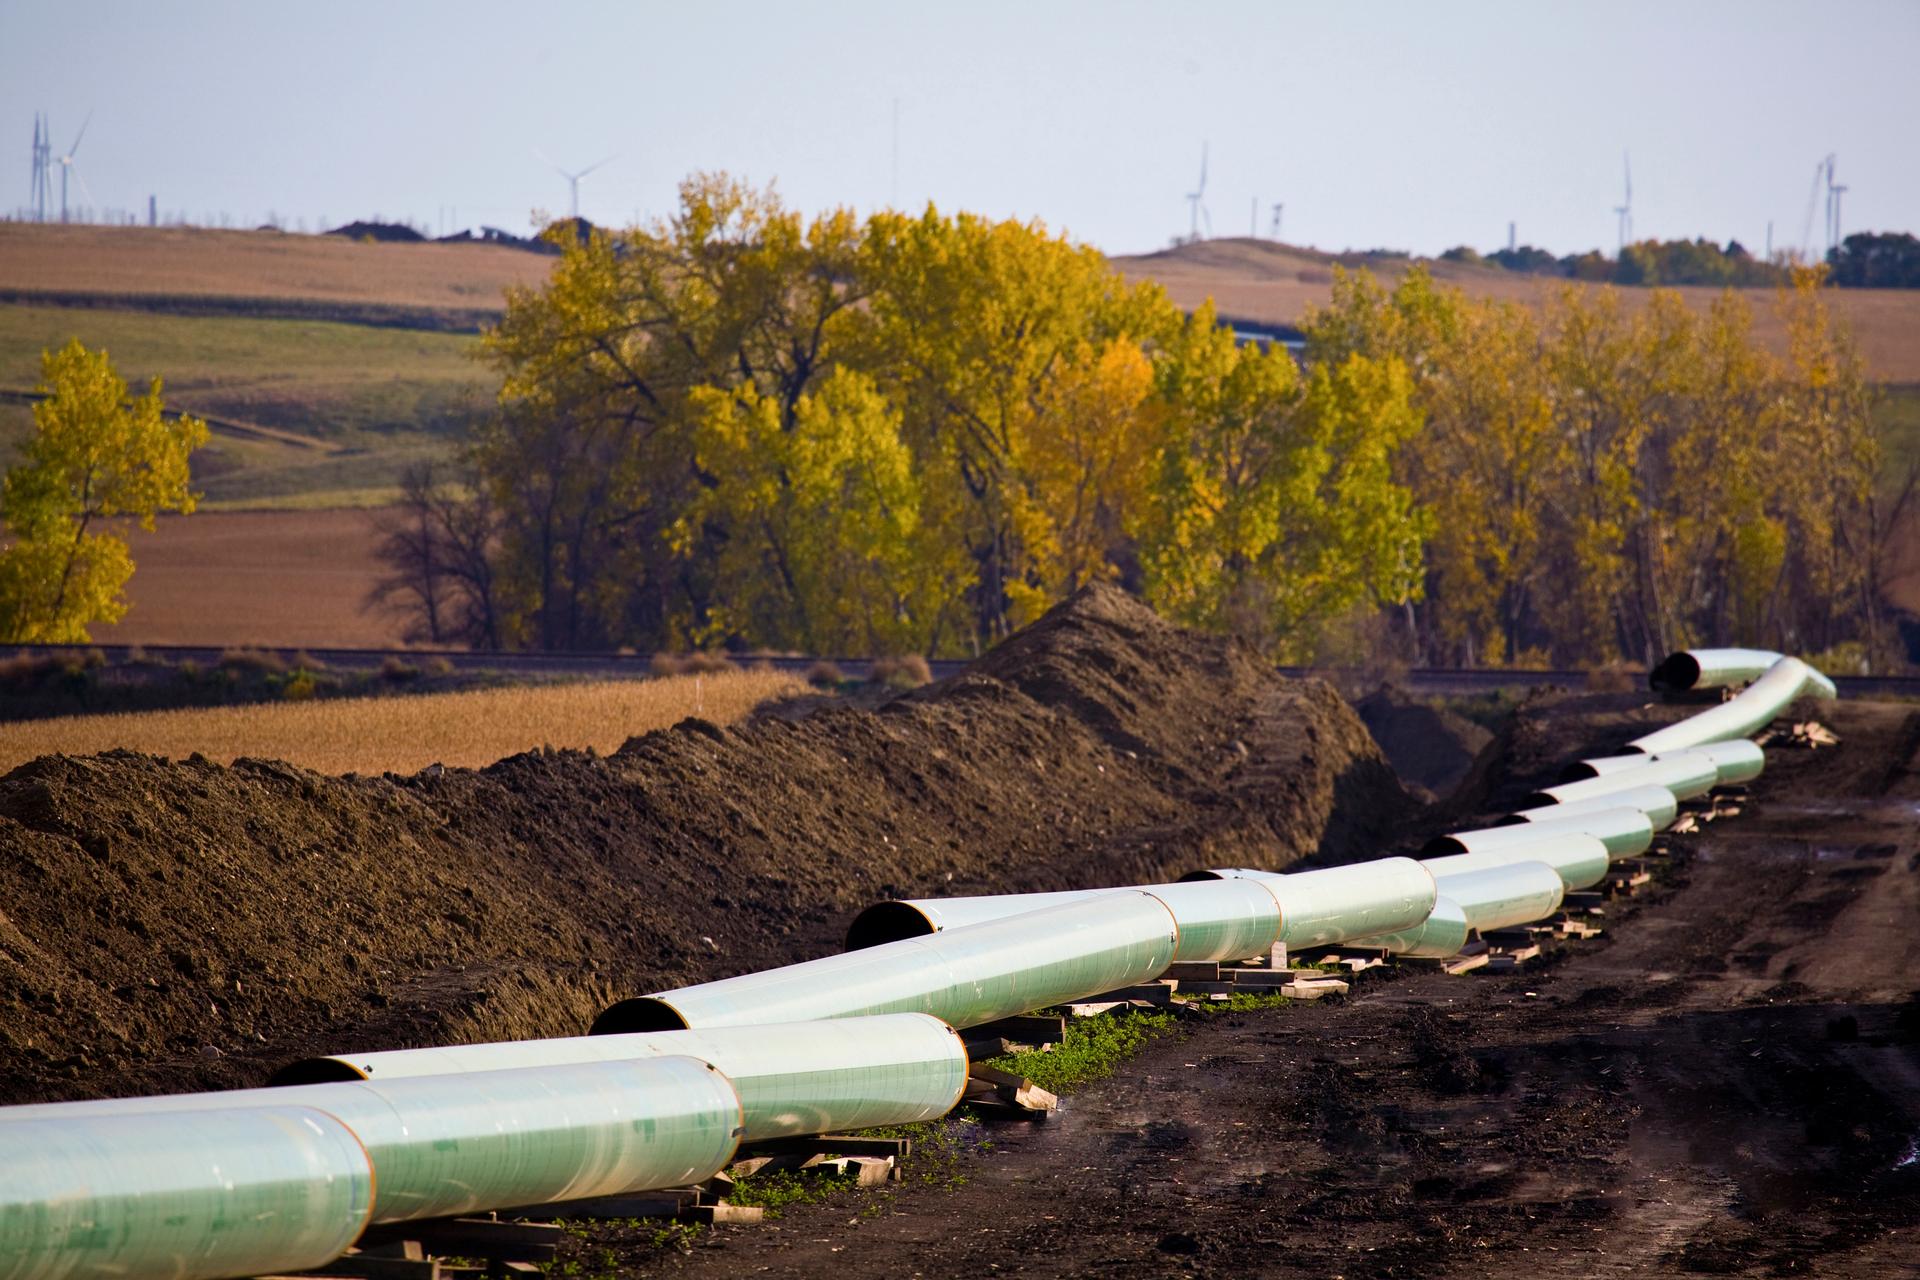 The Keystone Oil Pipeline is pictured under construction in North Dakota.